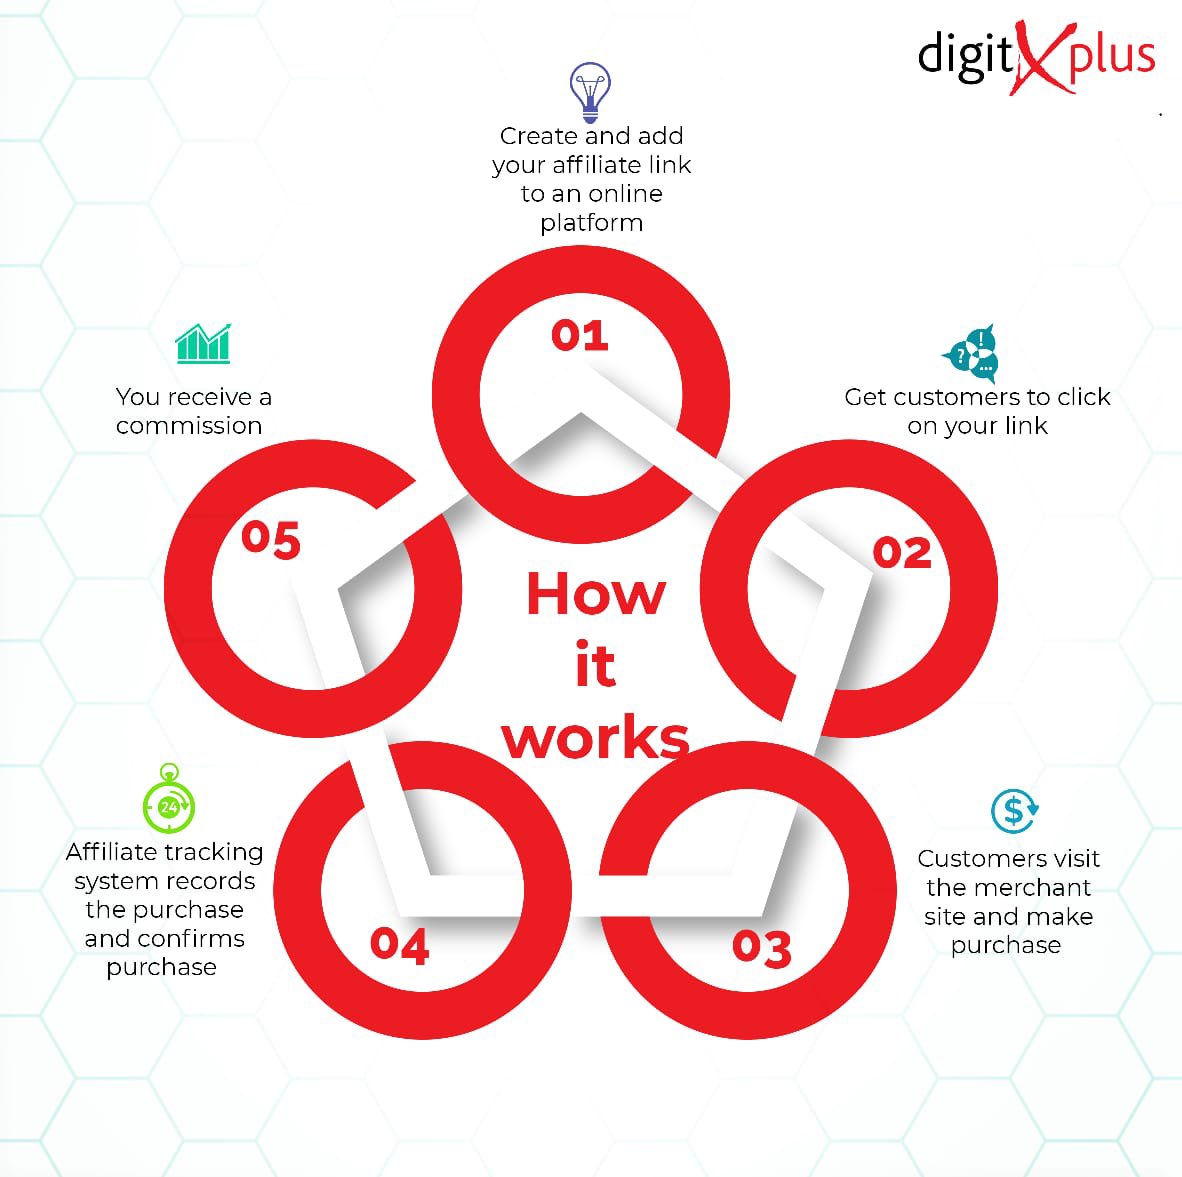 You've been hearing a lot about Affiliate Marketing

But how does it really work???

#digitXplus #theHive #Digitalmarketing #advertising #branding #paidmedia #mediaplanning #socialmedia #contentcreation #advertisingagency #strategy #affliatemarketing